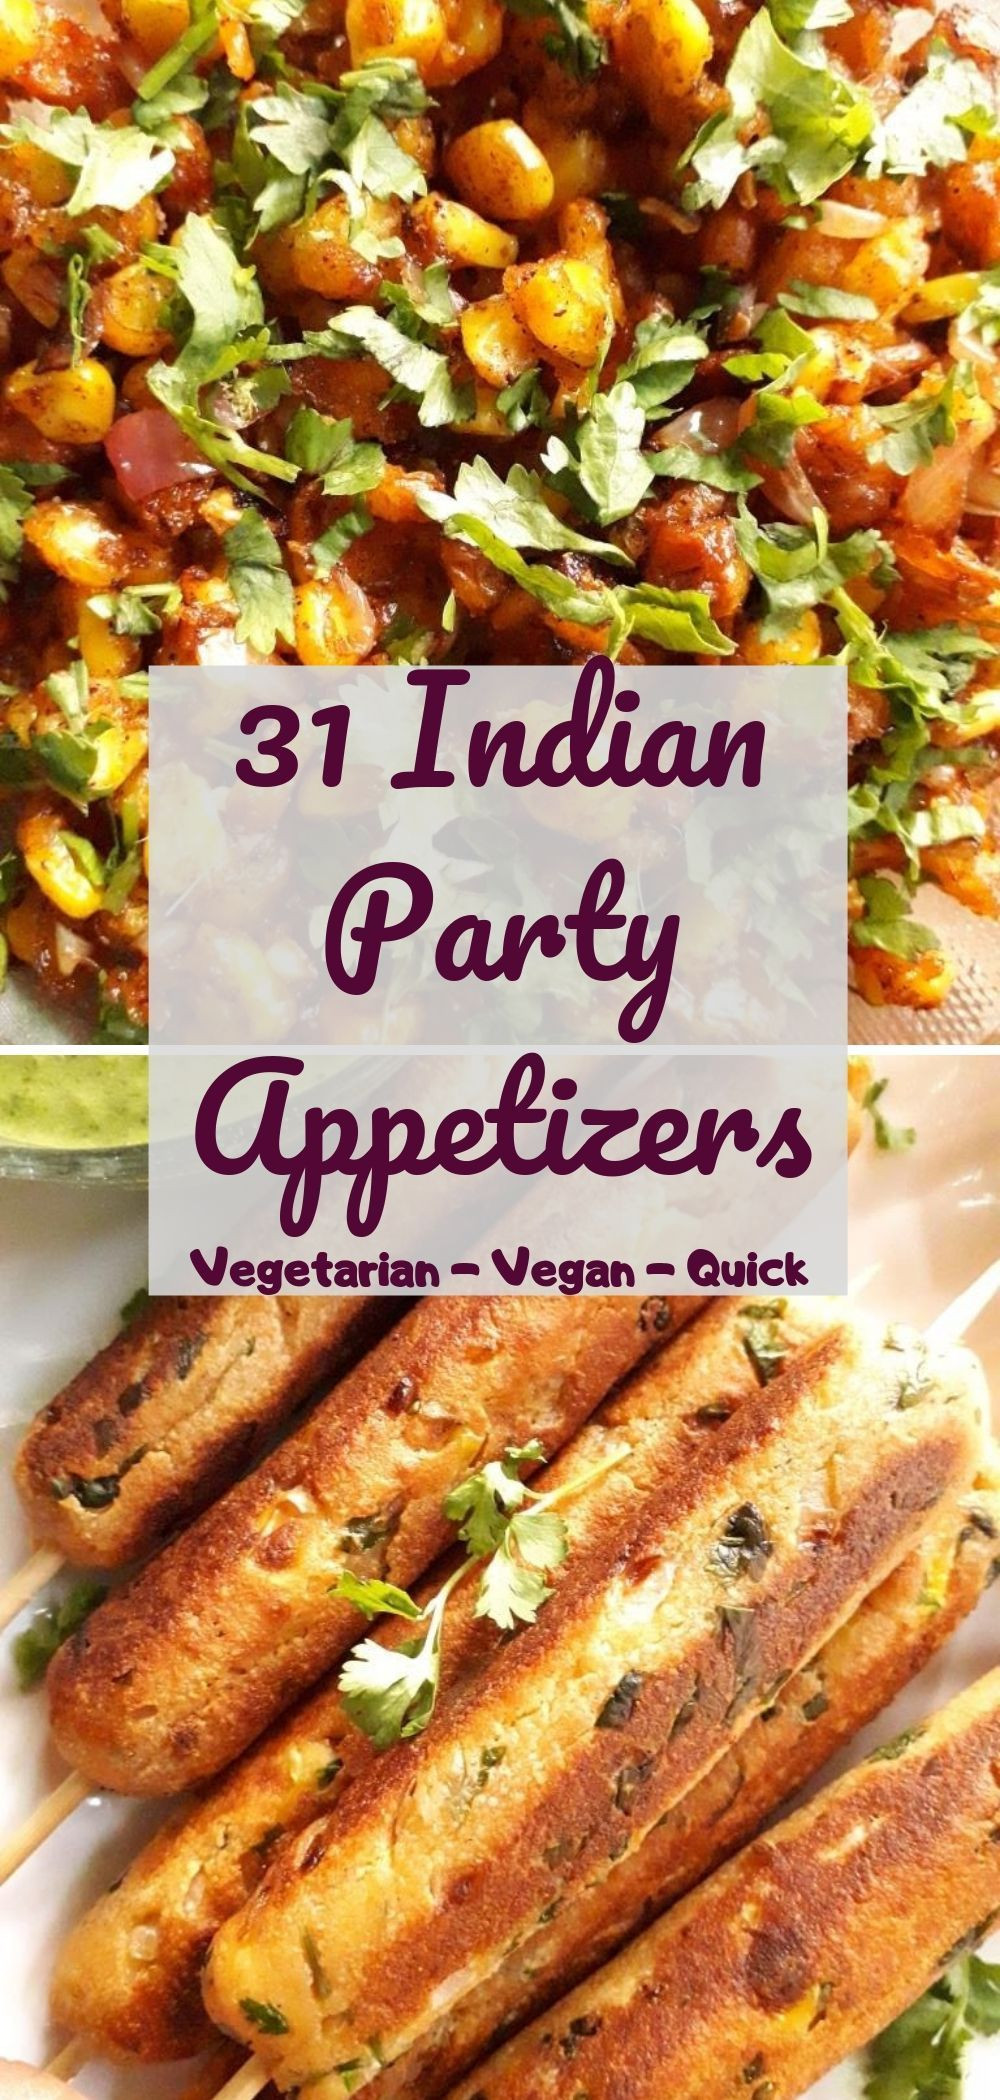 Quick Indian Appetizers
 Get recipes of 31 Quick & easy Indian party appetizers